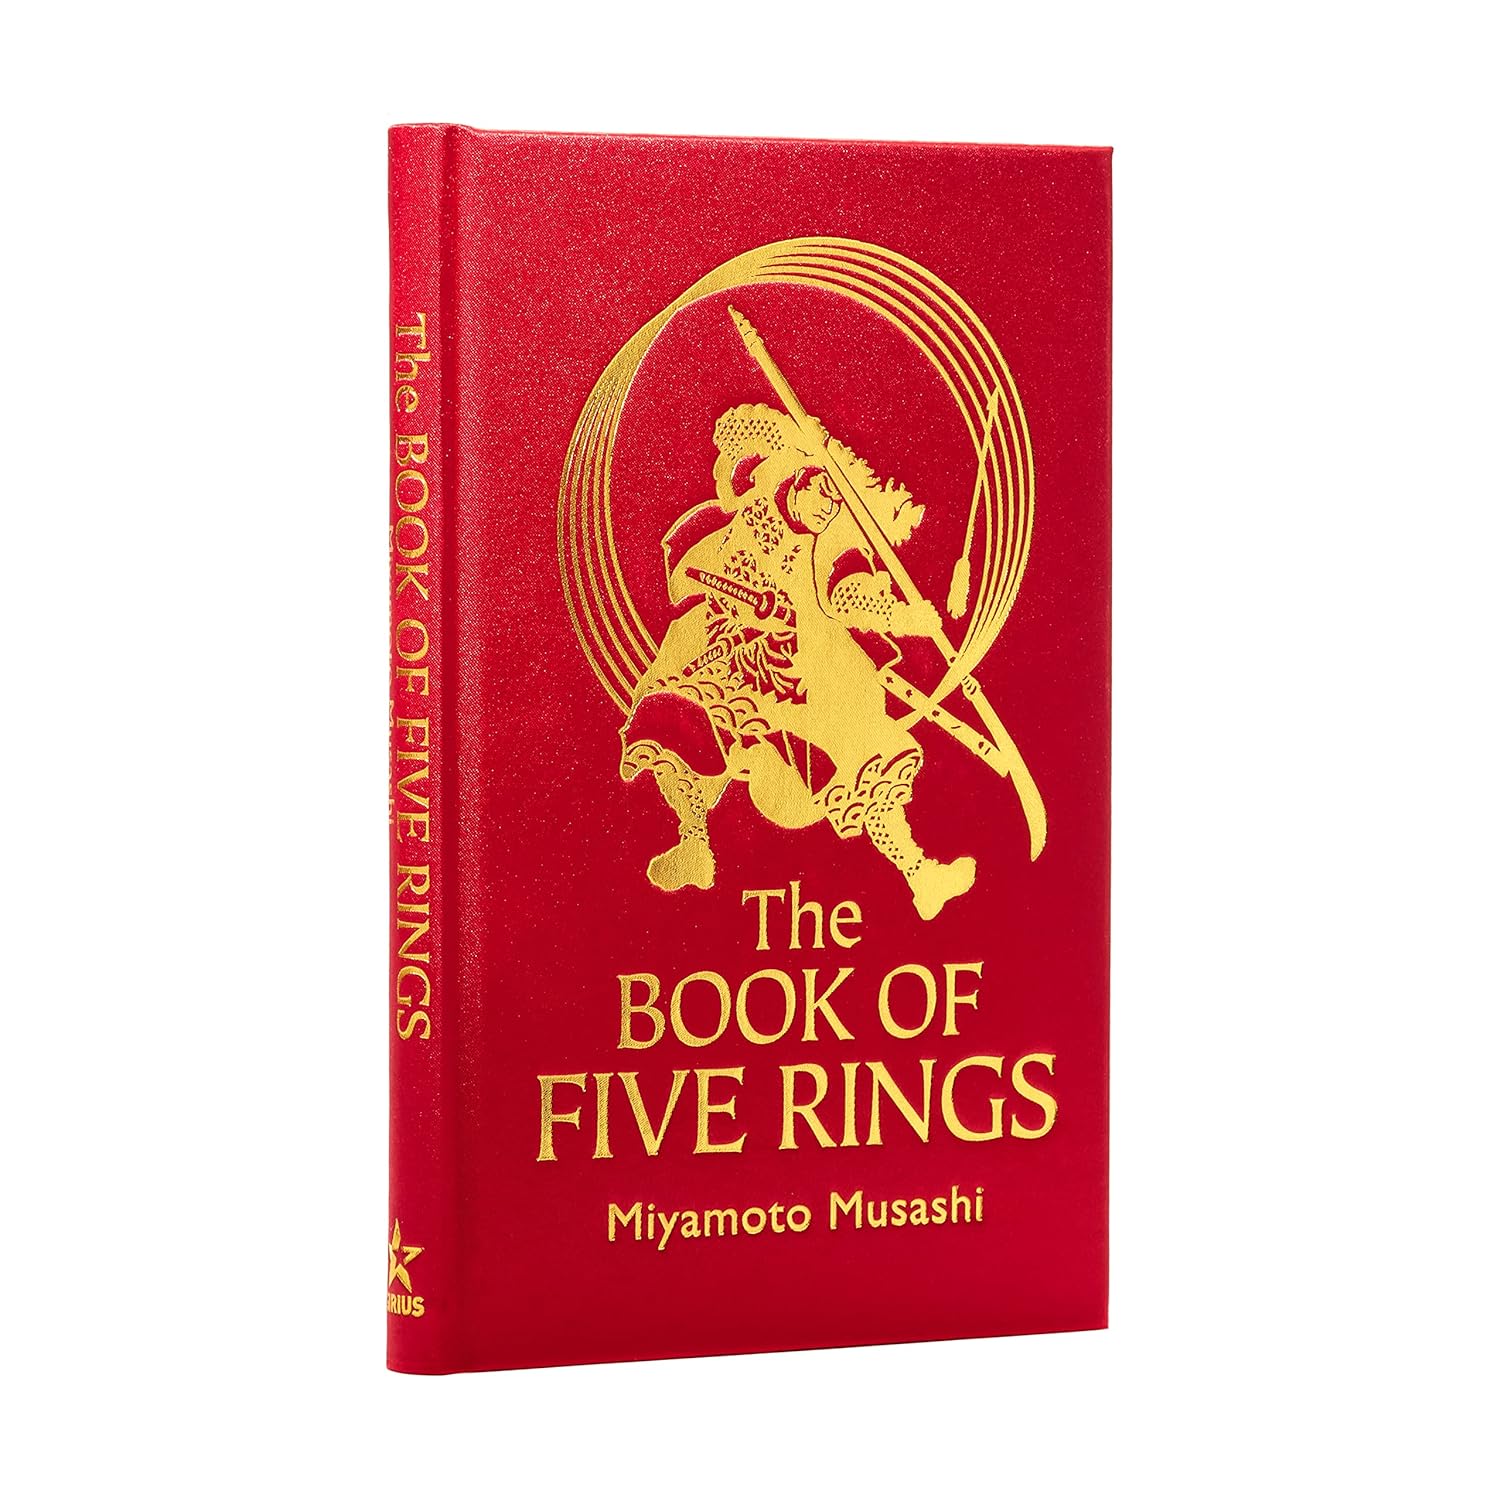 The Book of Five Rings: Deluxe Slipcase Edition by Miyamoto Musashi